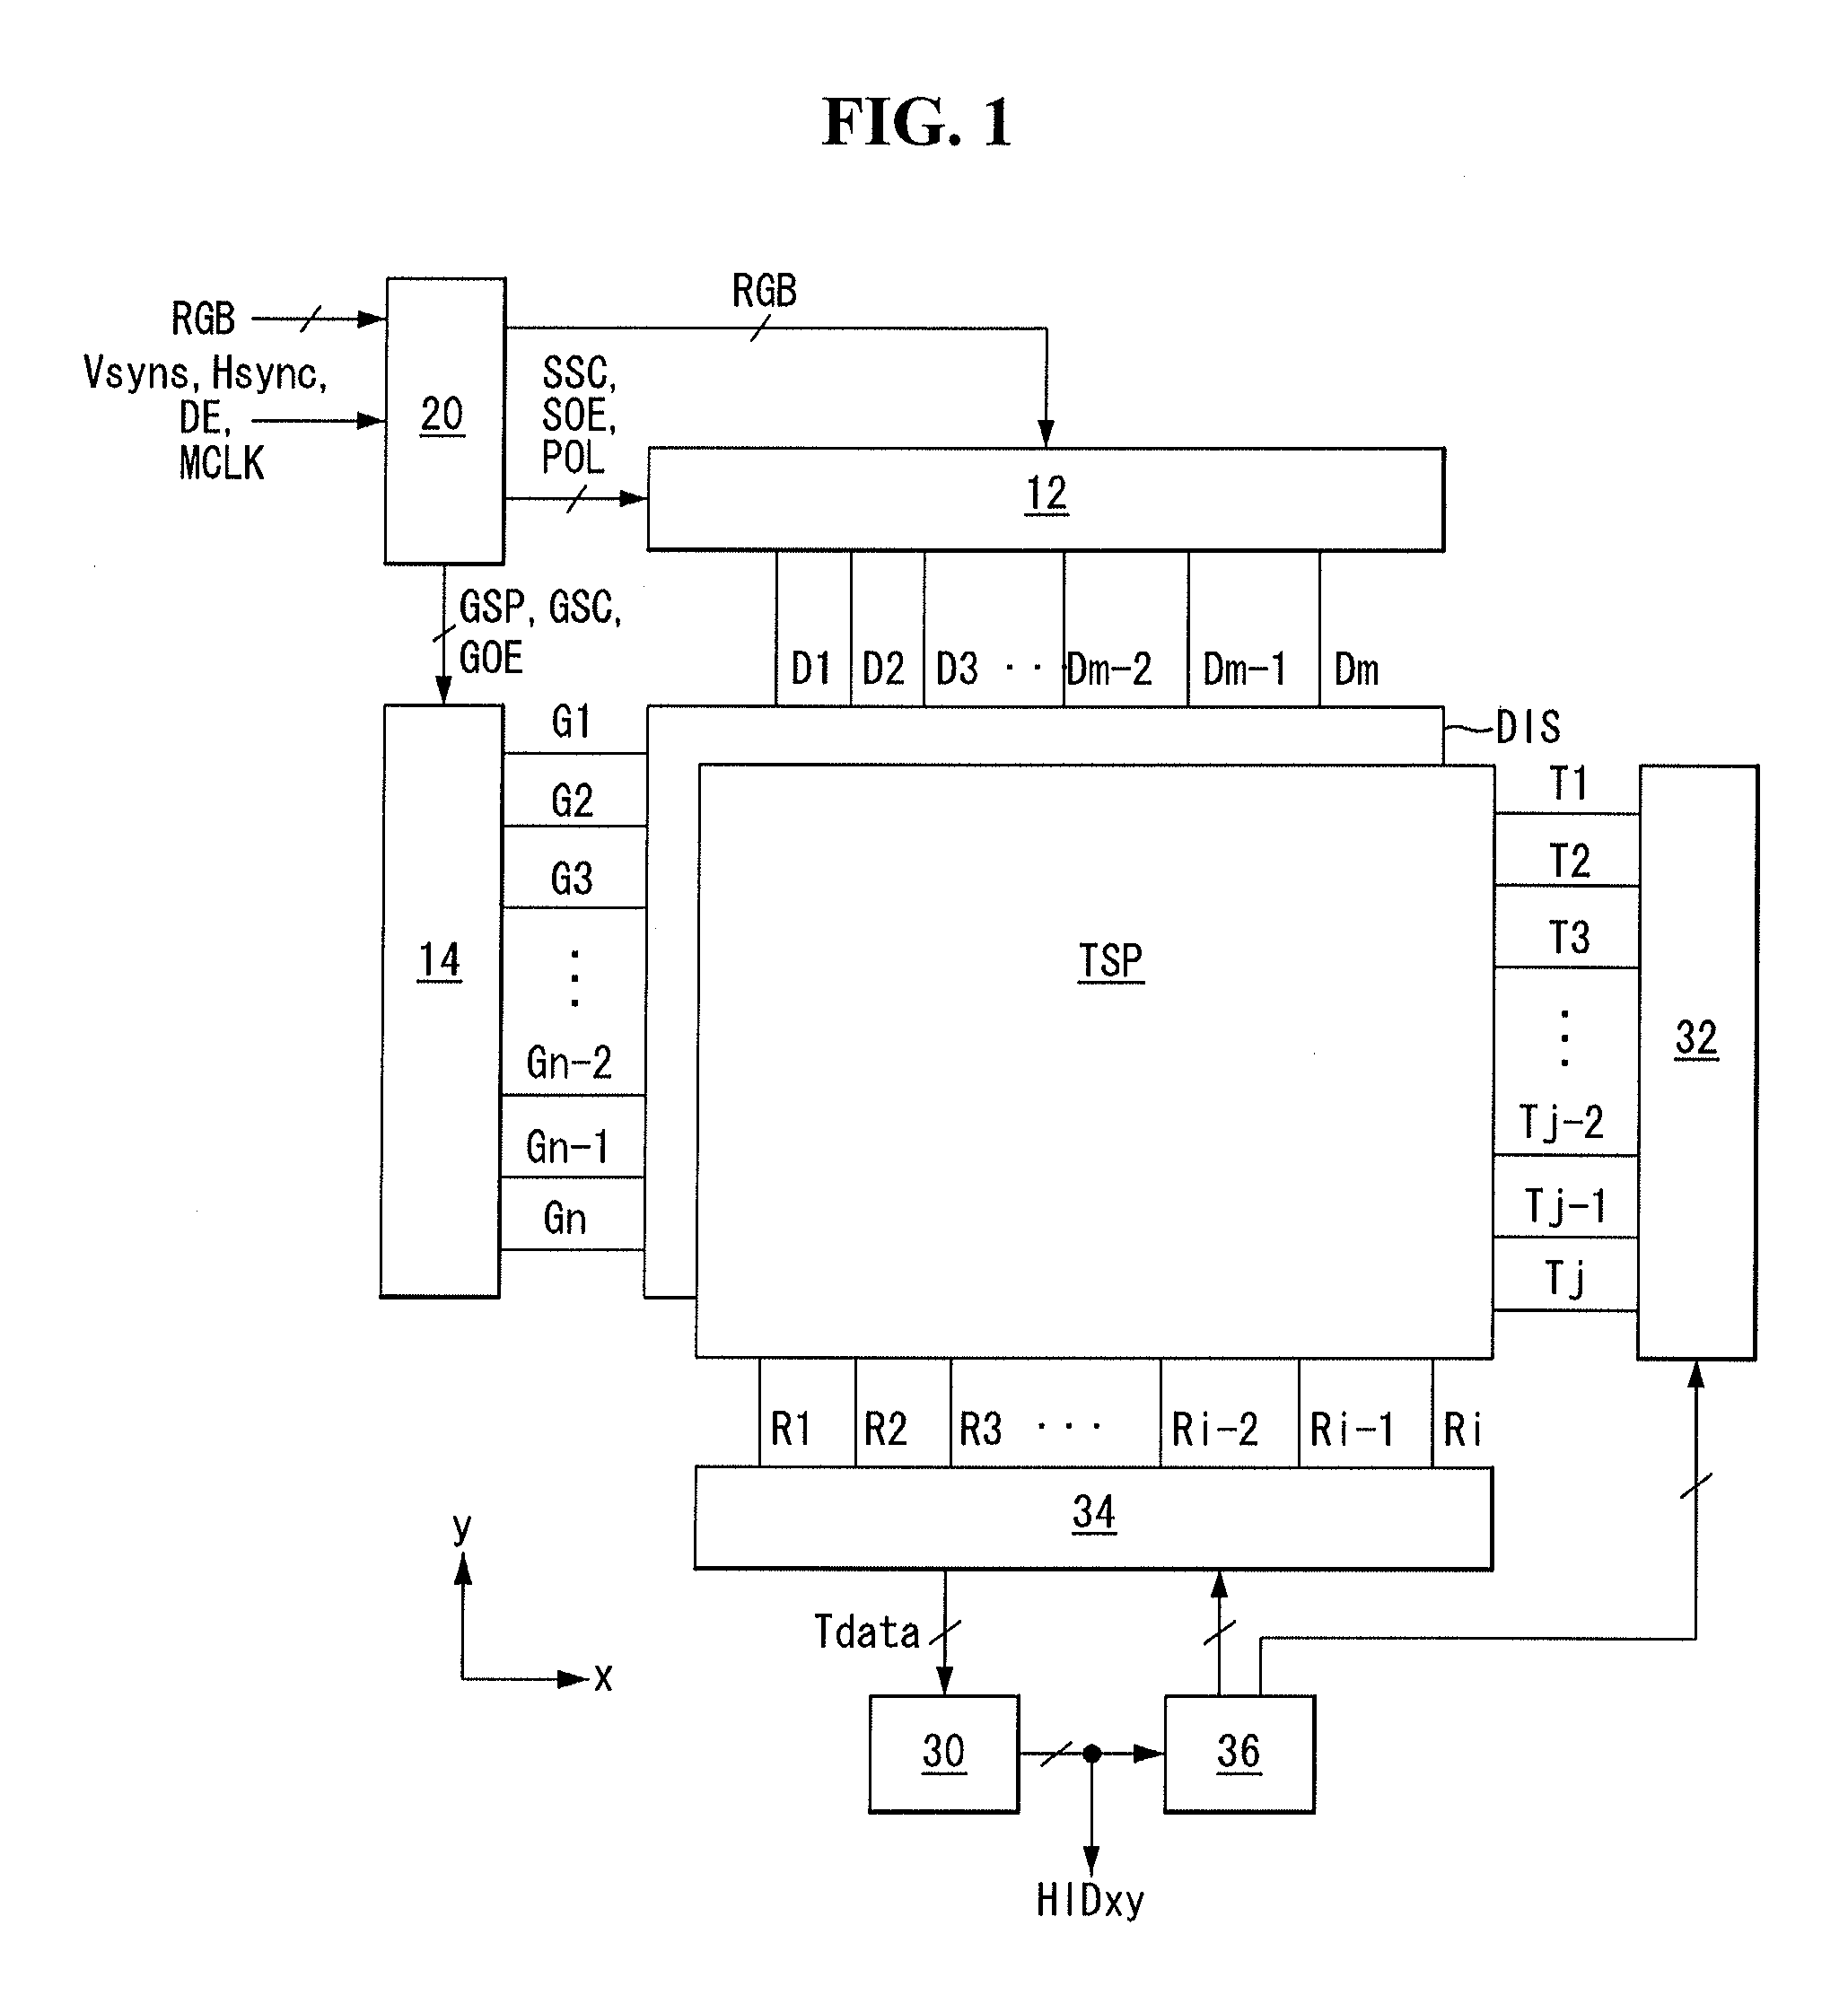 Touch screen sensing device and method for sensing touch screen